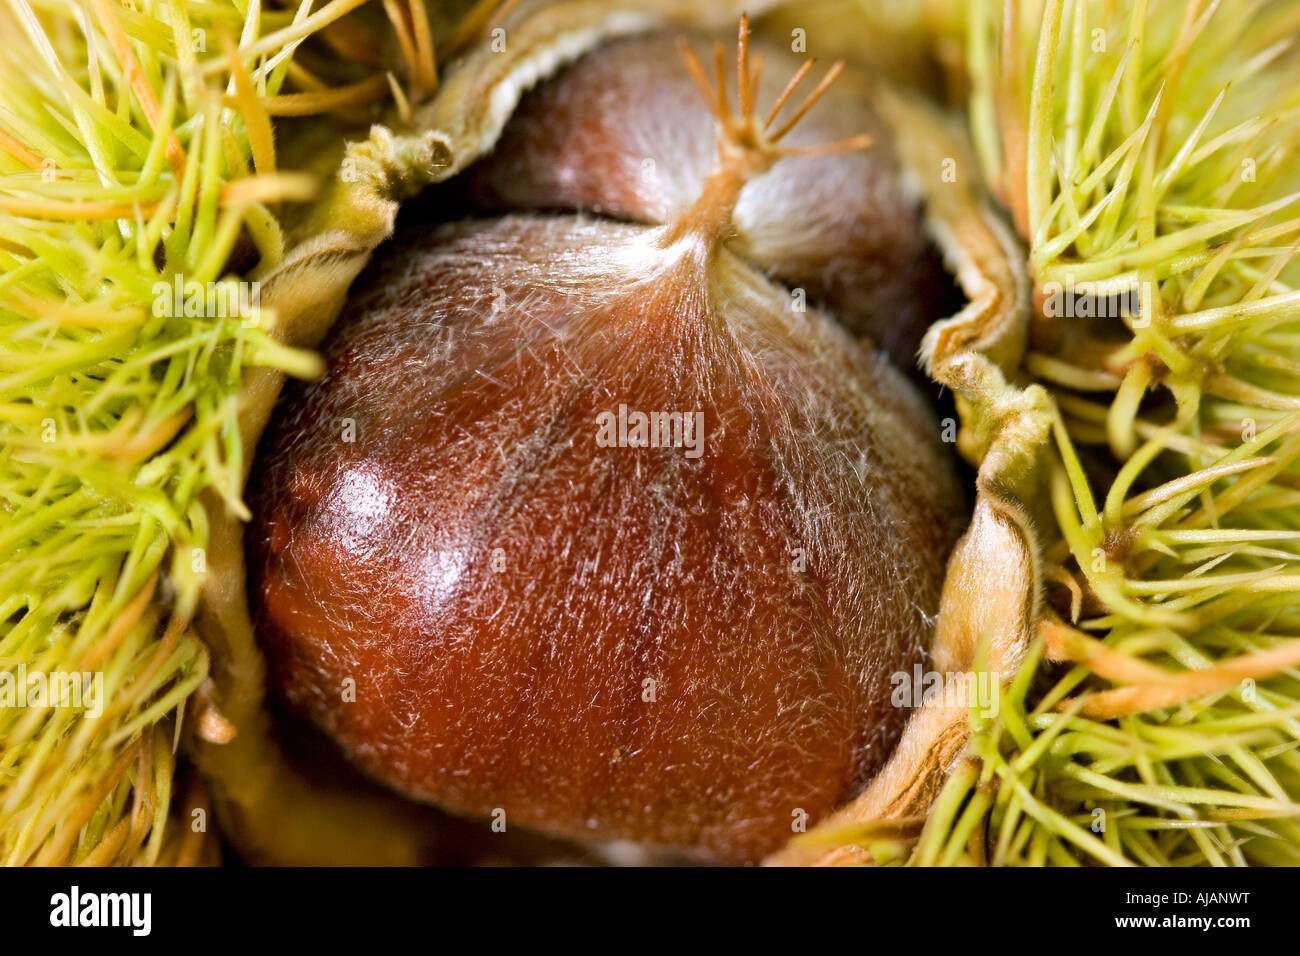 Chestnuts (Castanea sativa ) in Their Shell Stock Photo